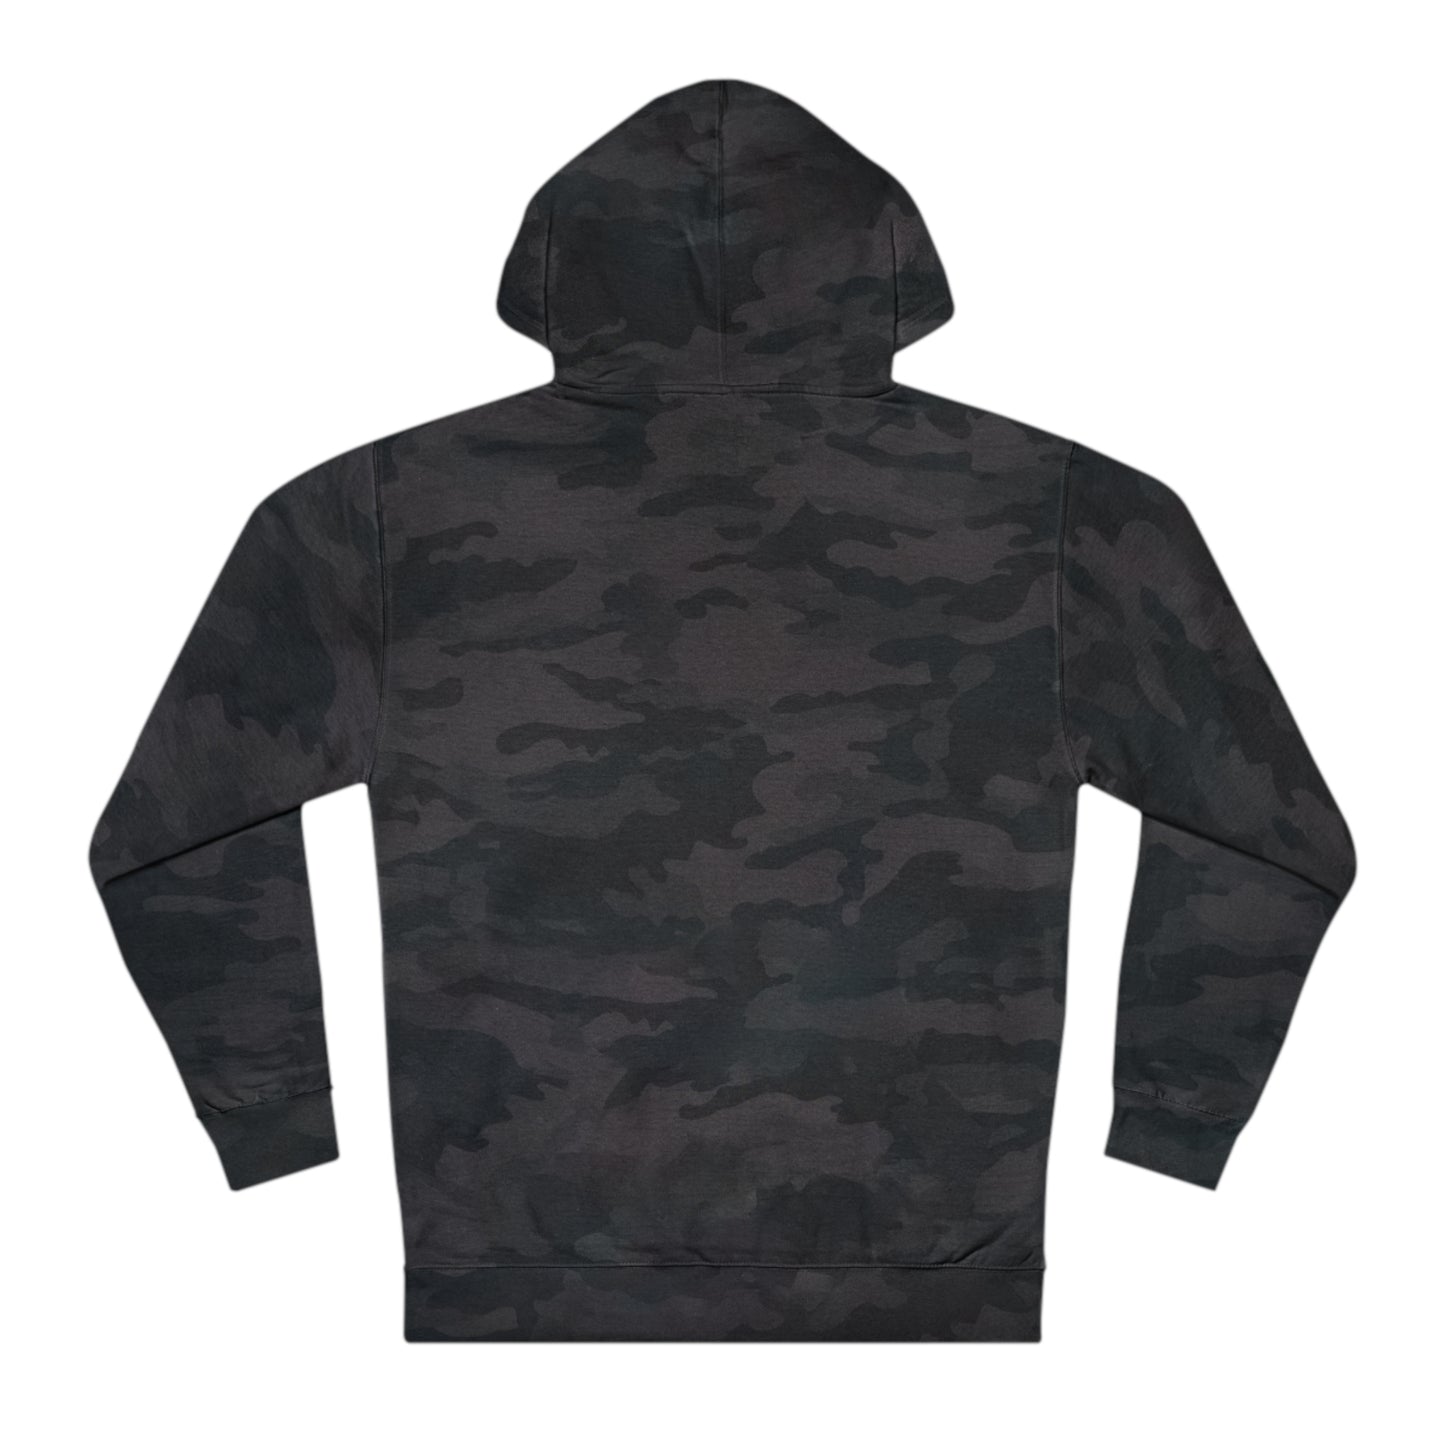 Pokes With A Purpose Camo Hoodie